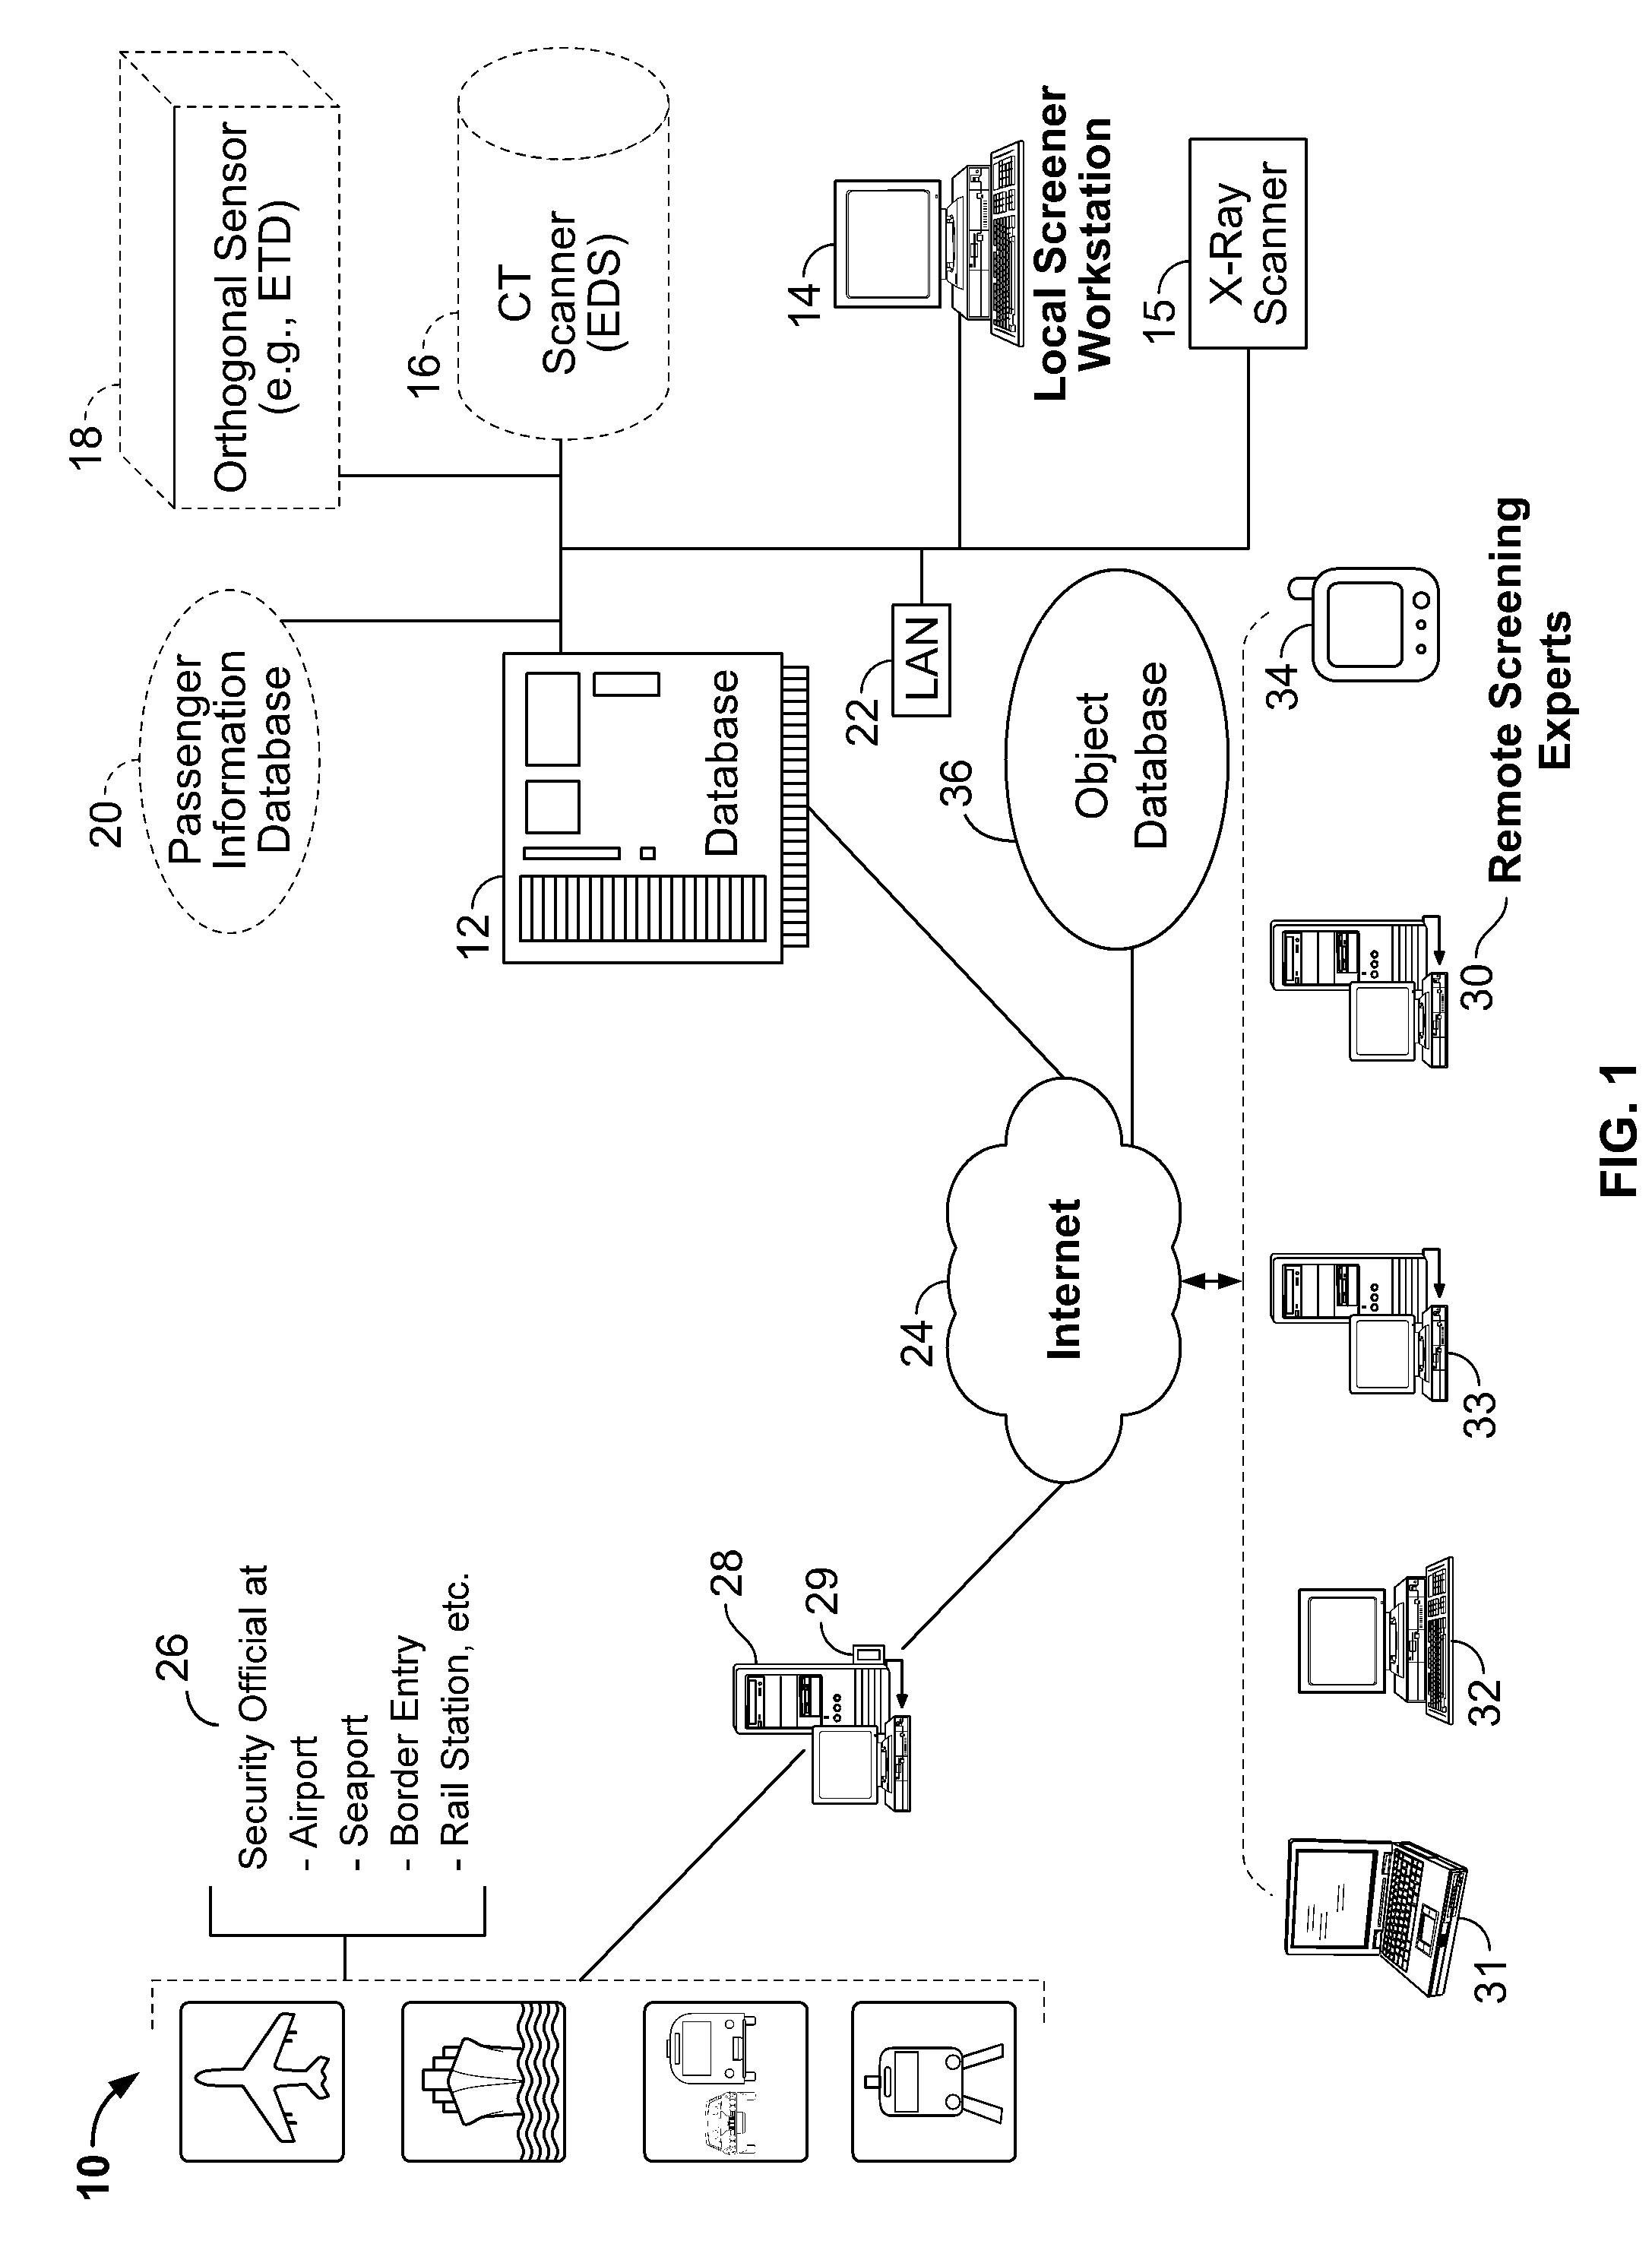 Method and system for electronic inspection of baggage and cargo